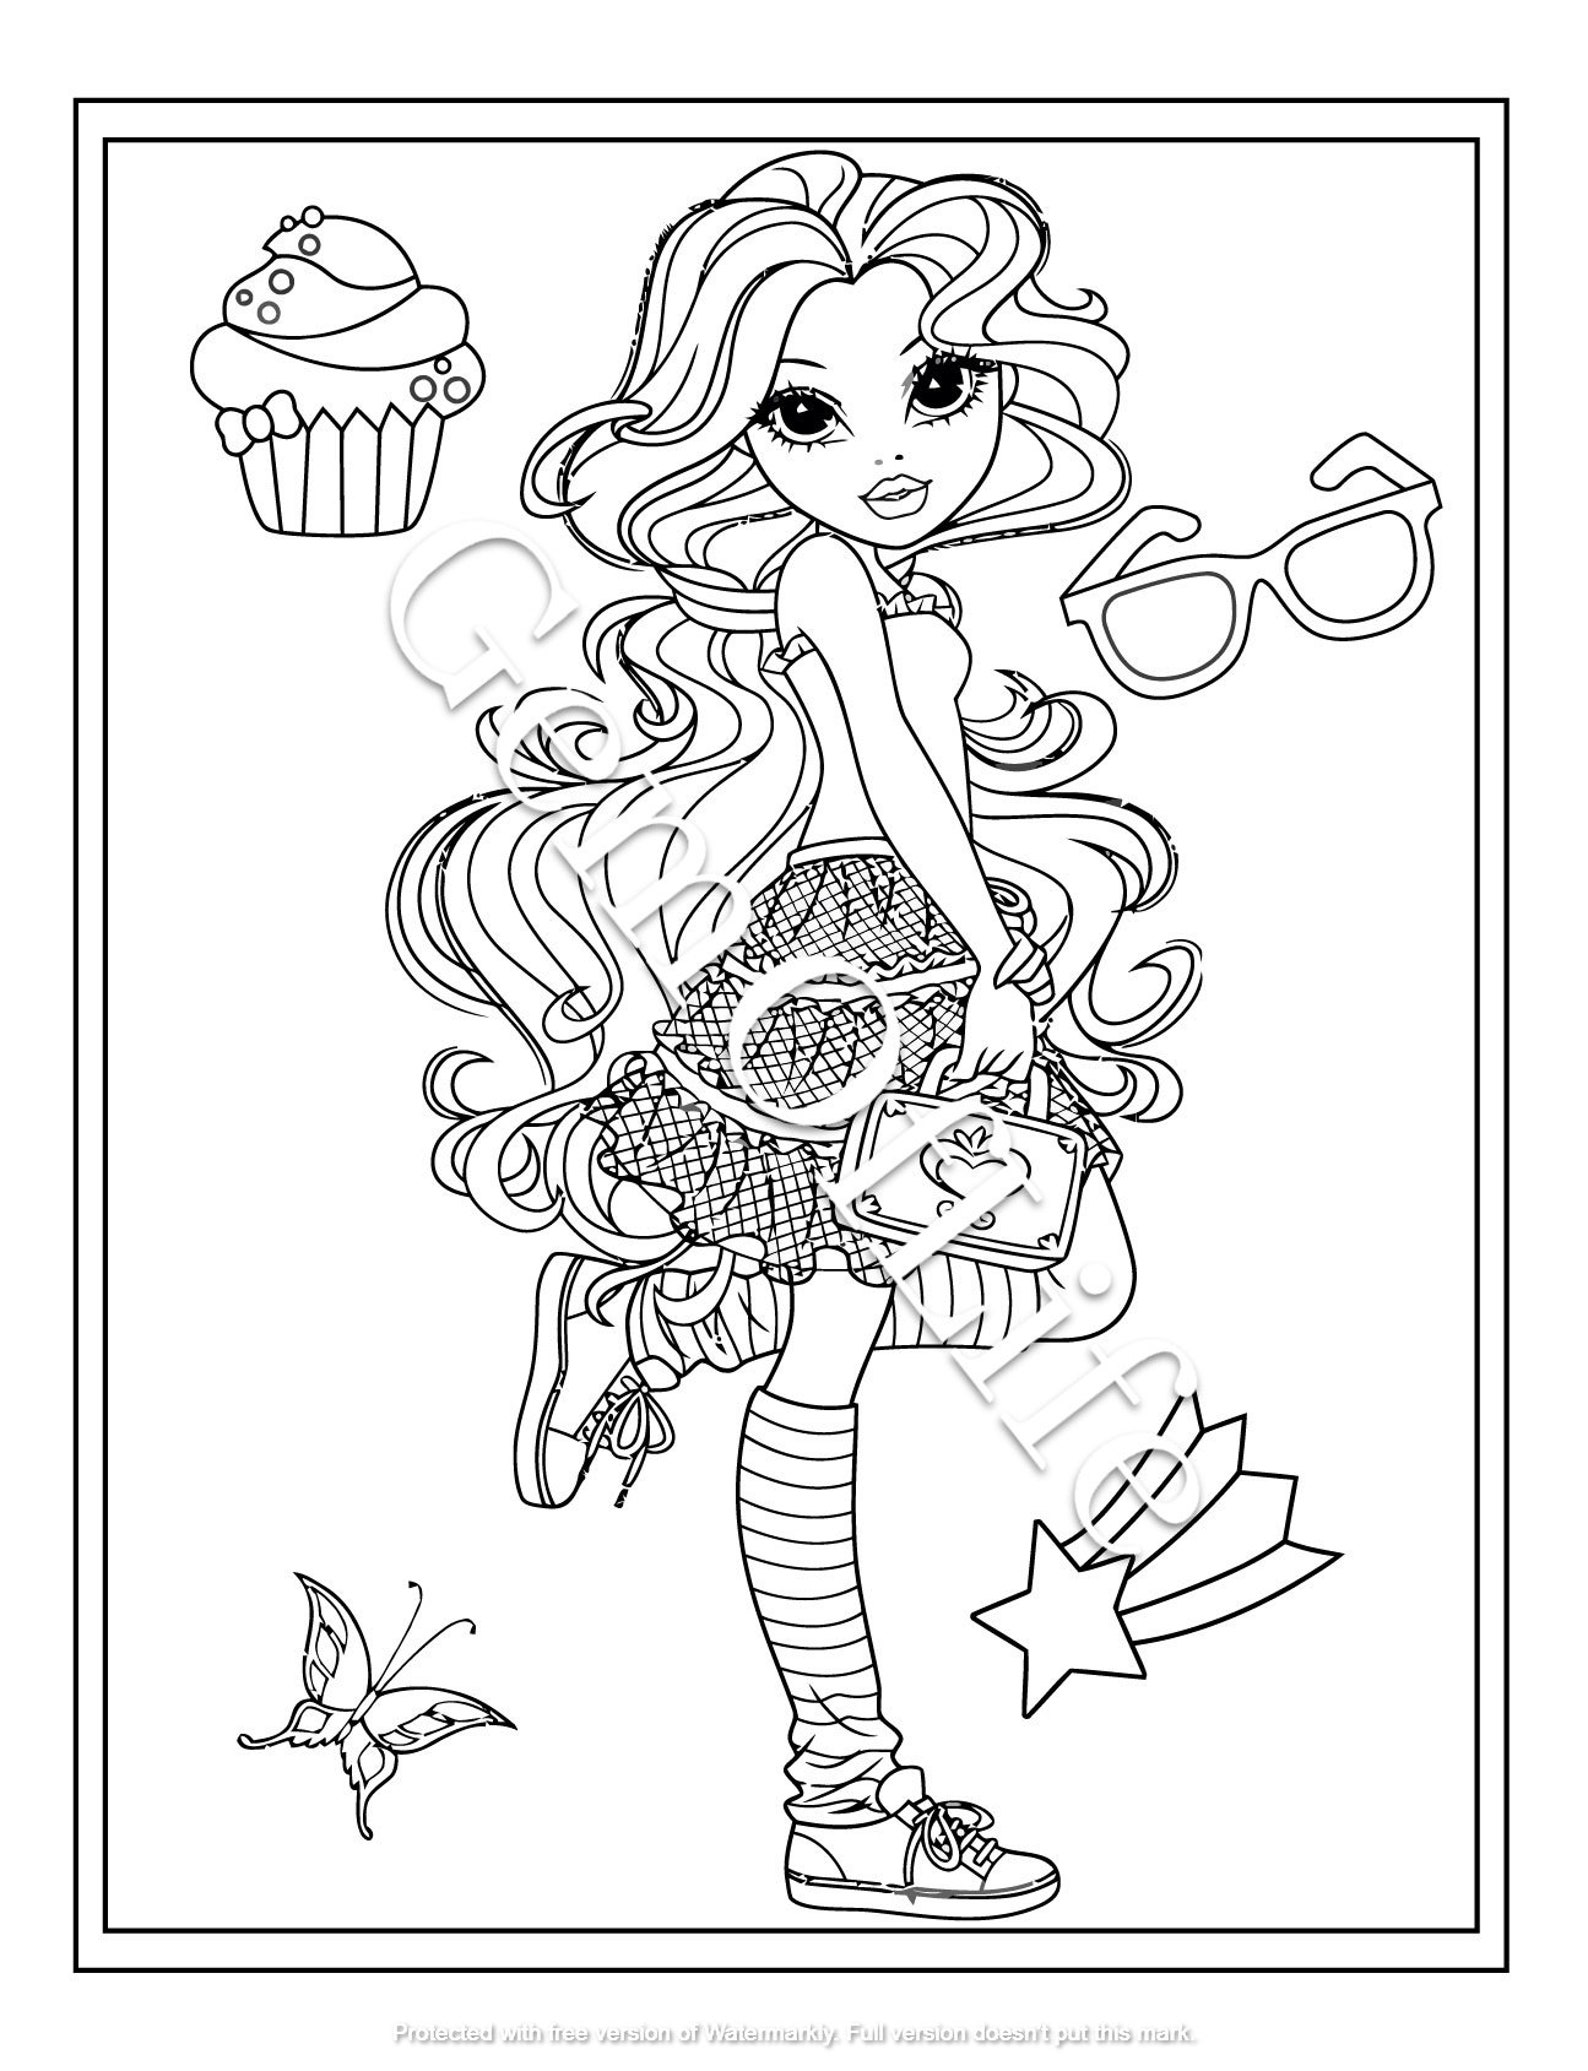 29 Fashion Girl Coloring Pages /Instant/Digital | Etsy